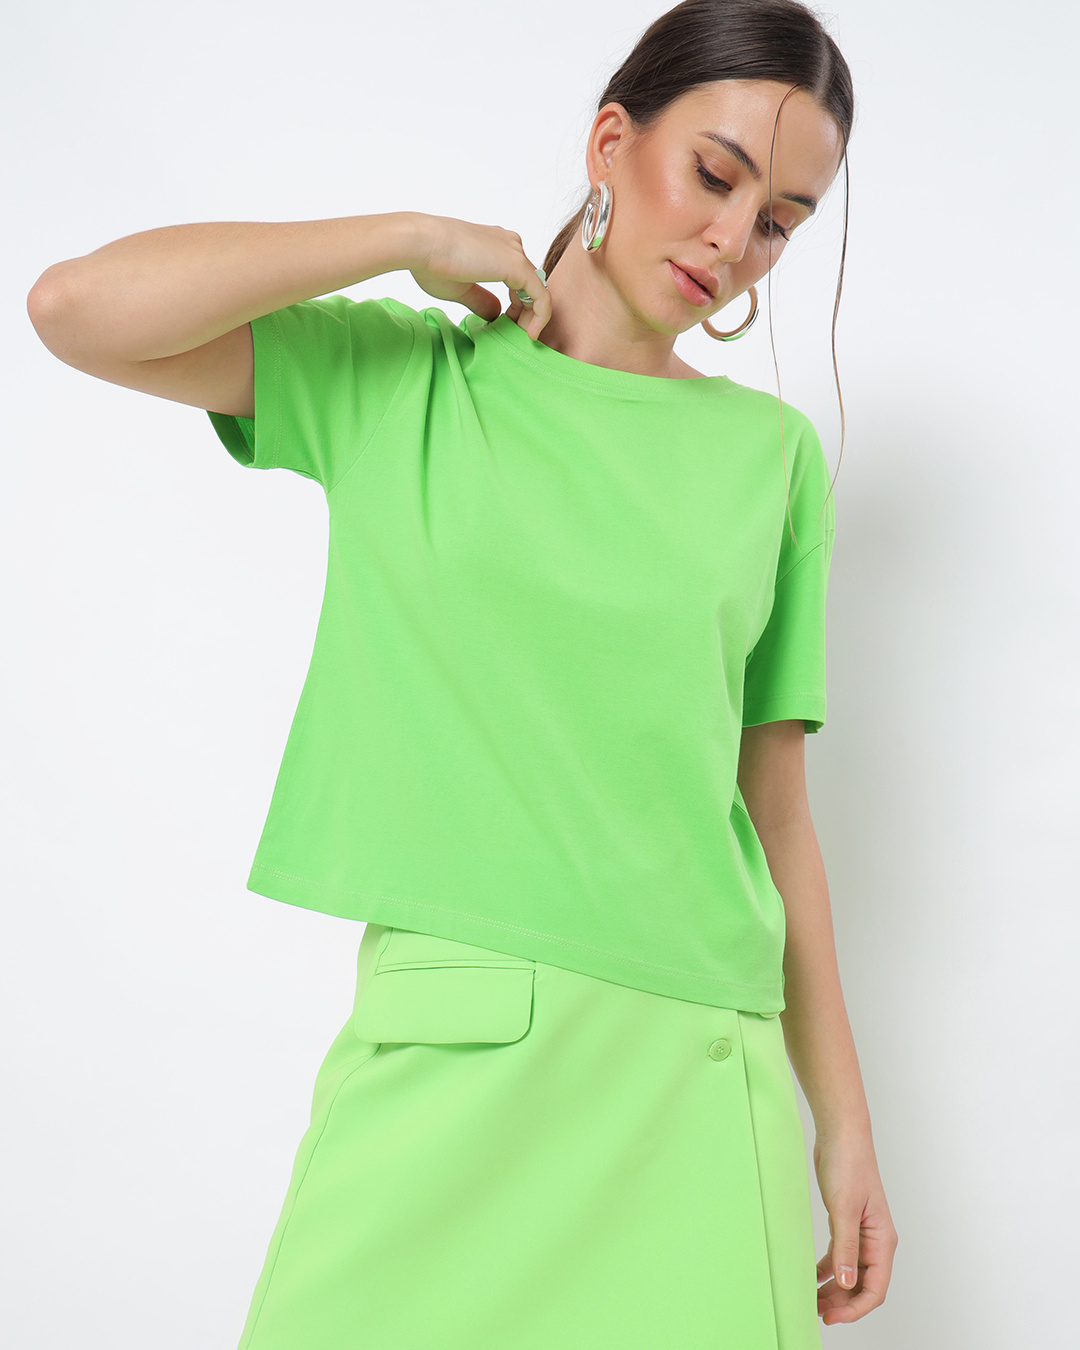 Buy Chilled Out Green Short Top for Women Jasmine Green Online at Bewakoof